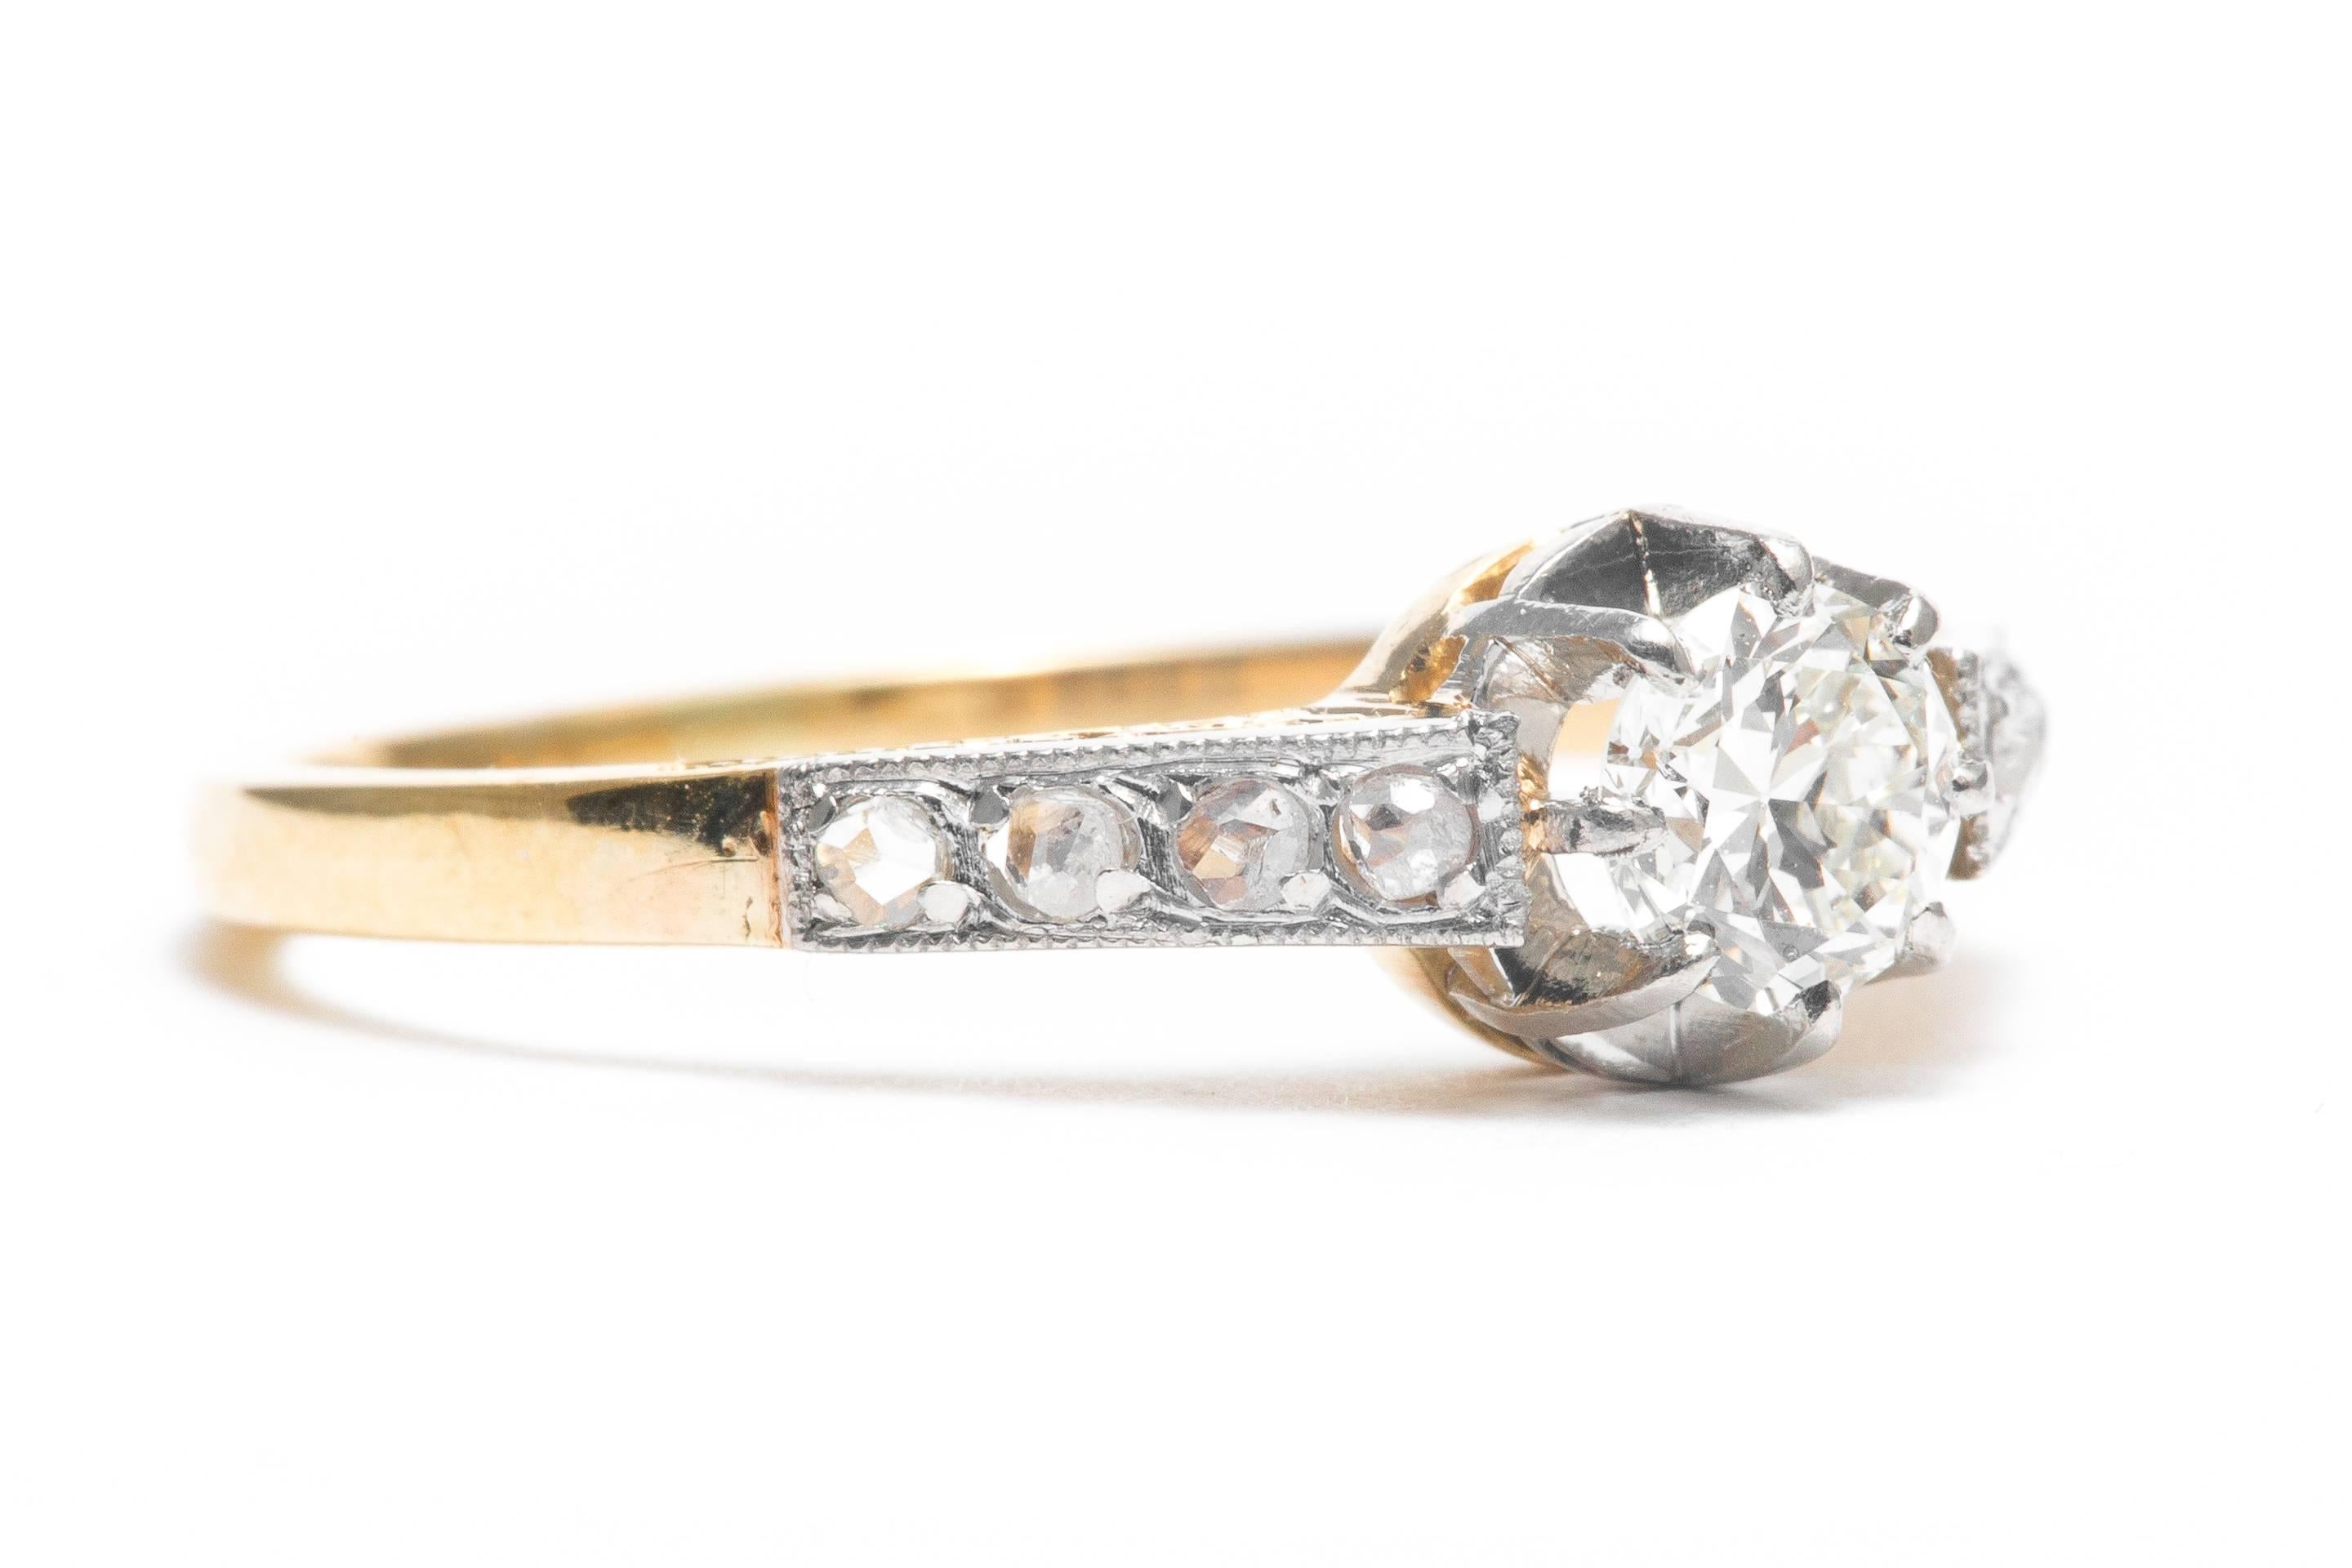 Beacon Hill Jewelers Presents:

An original art deco period diamond engagement ring in 18 karat yellow gold and platinum.  Centered by a 0.40 carat antique European cut diamond framed by rose cut diamonds, this ring features hand engraving on the